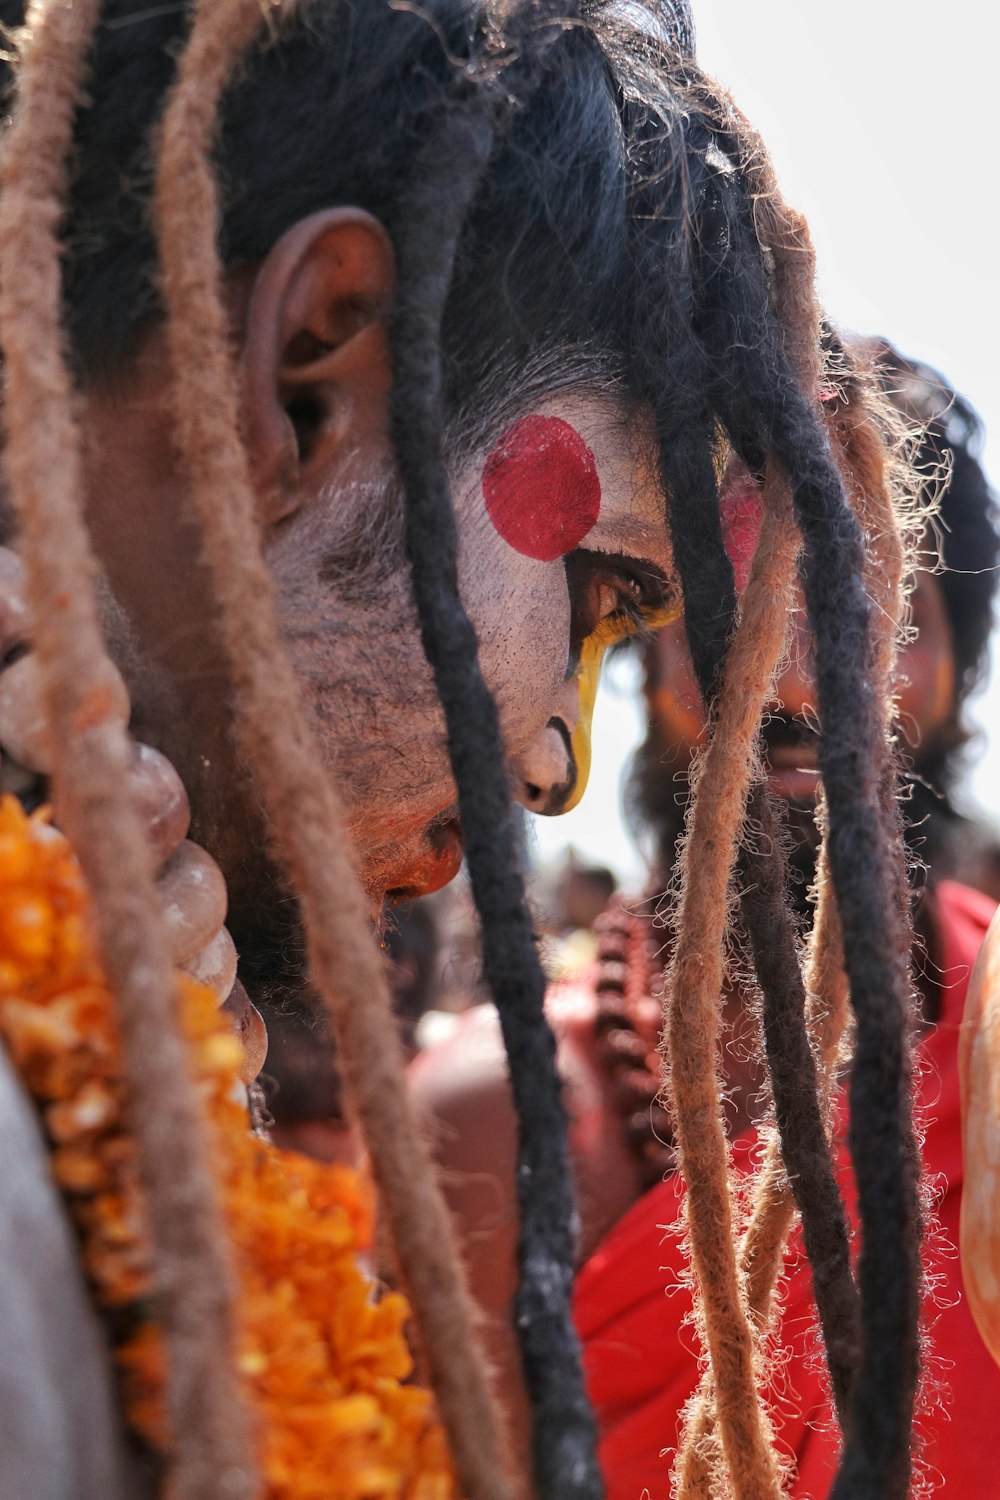 a group of people with clown makeup and dreadlocks